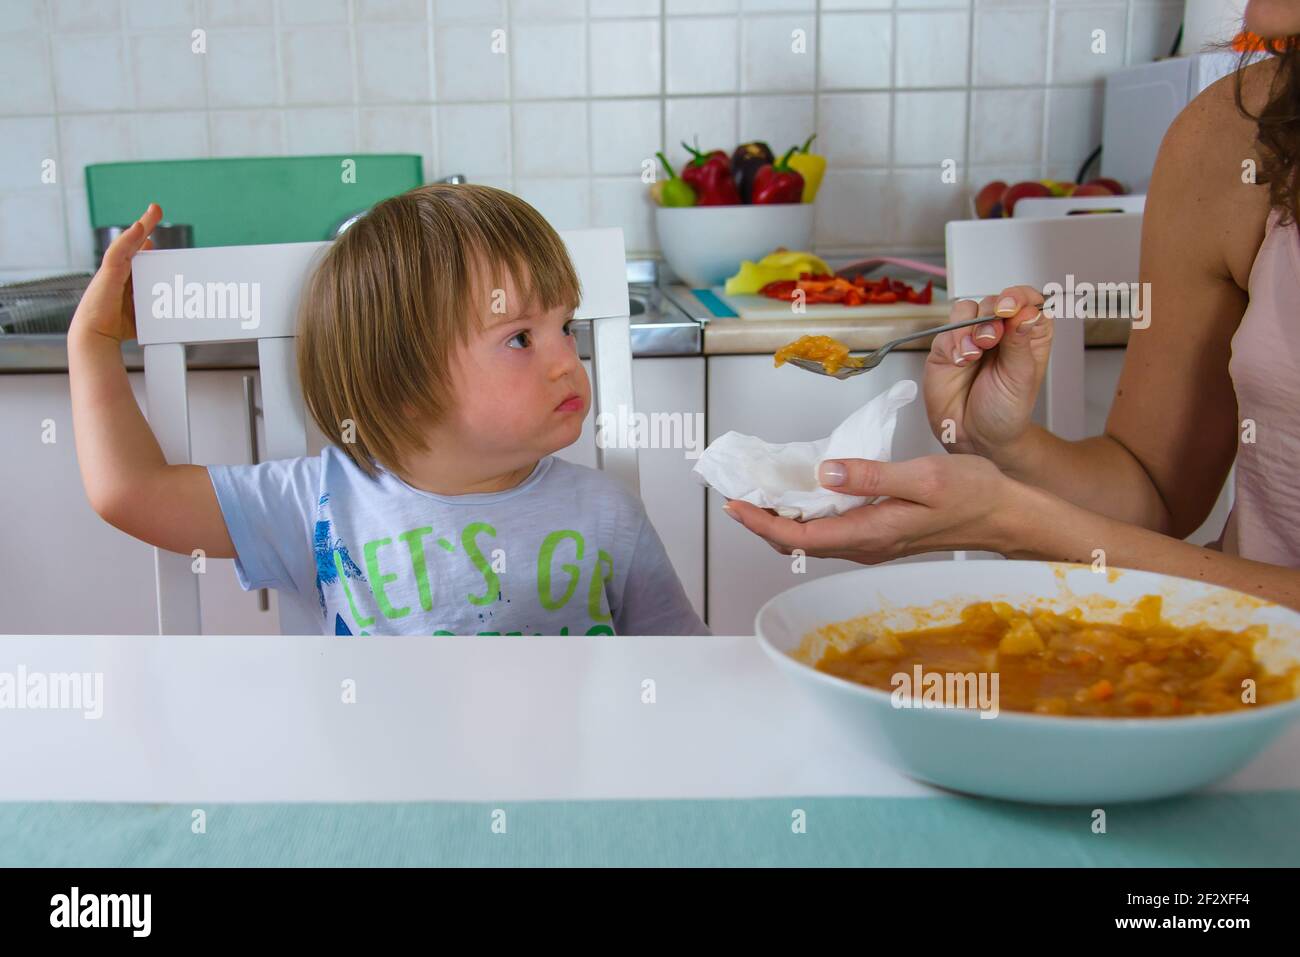 Mom feeding her disabled child with down syndrome. Mother giving food to toddler at home. Child doesn't like food. Stock Photo